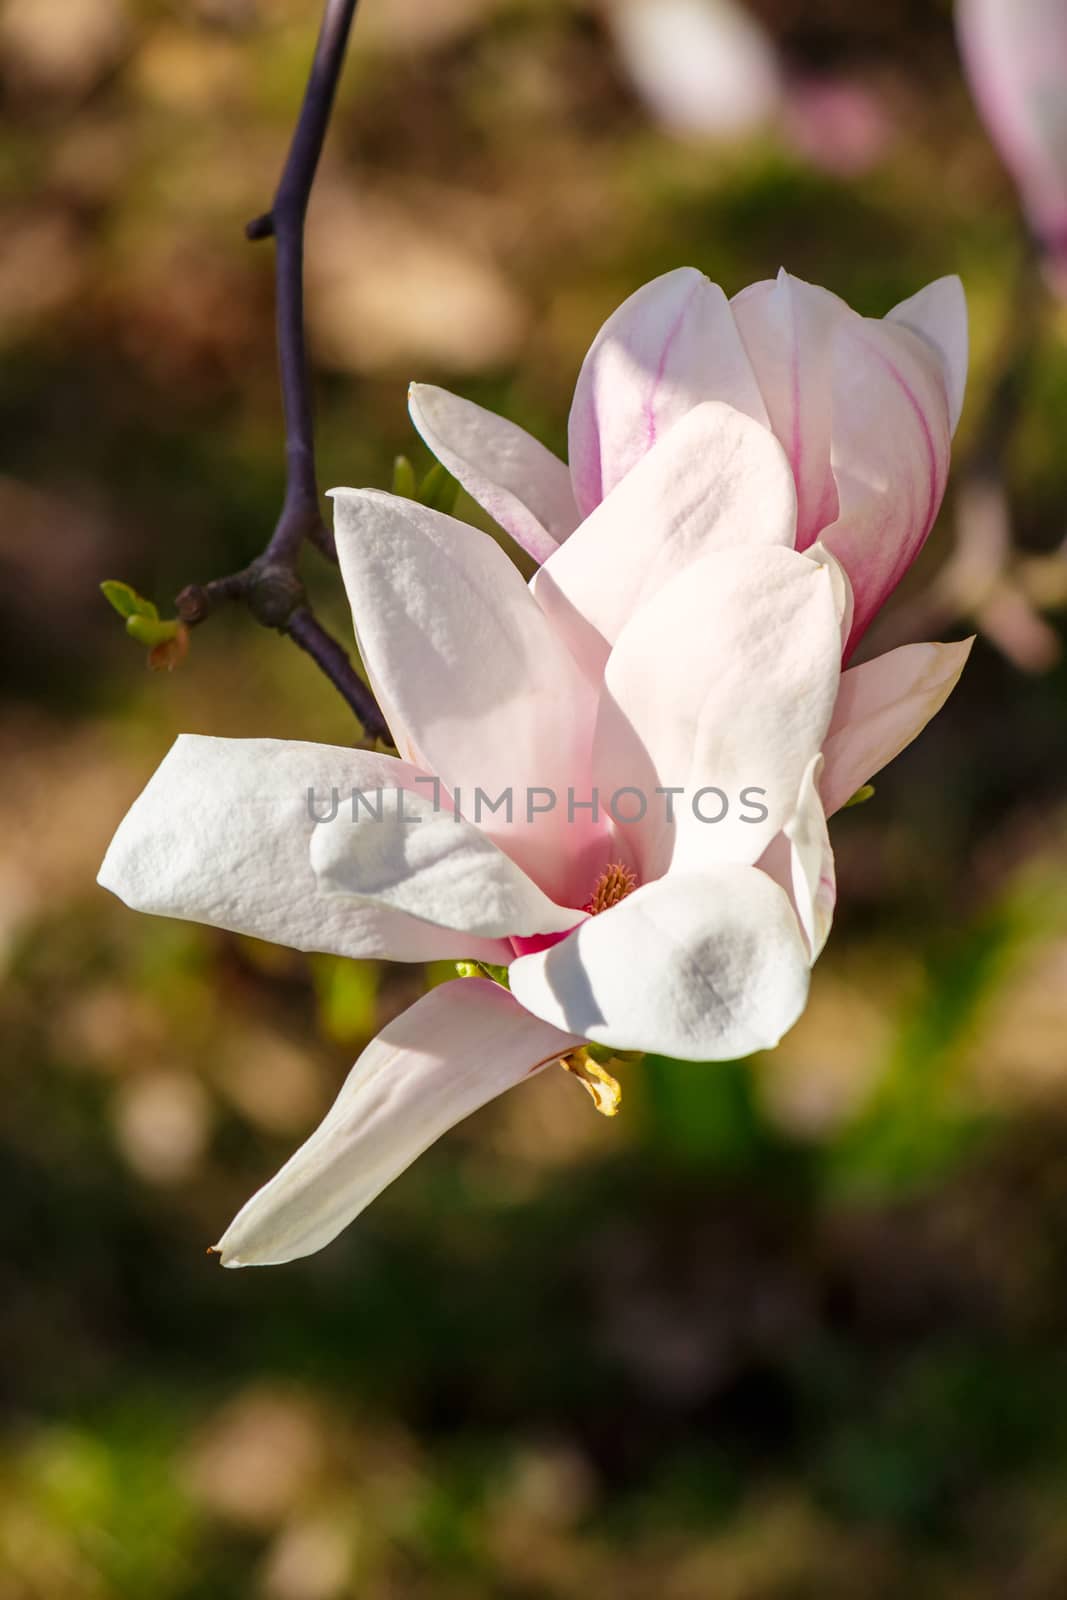 magnolia flowers close up with shallow depth of field on a blurry background